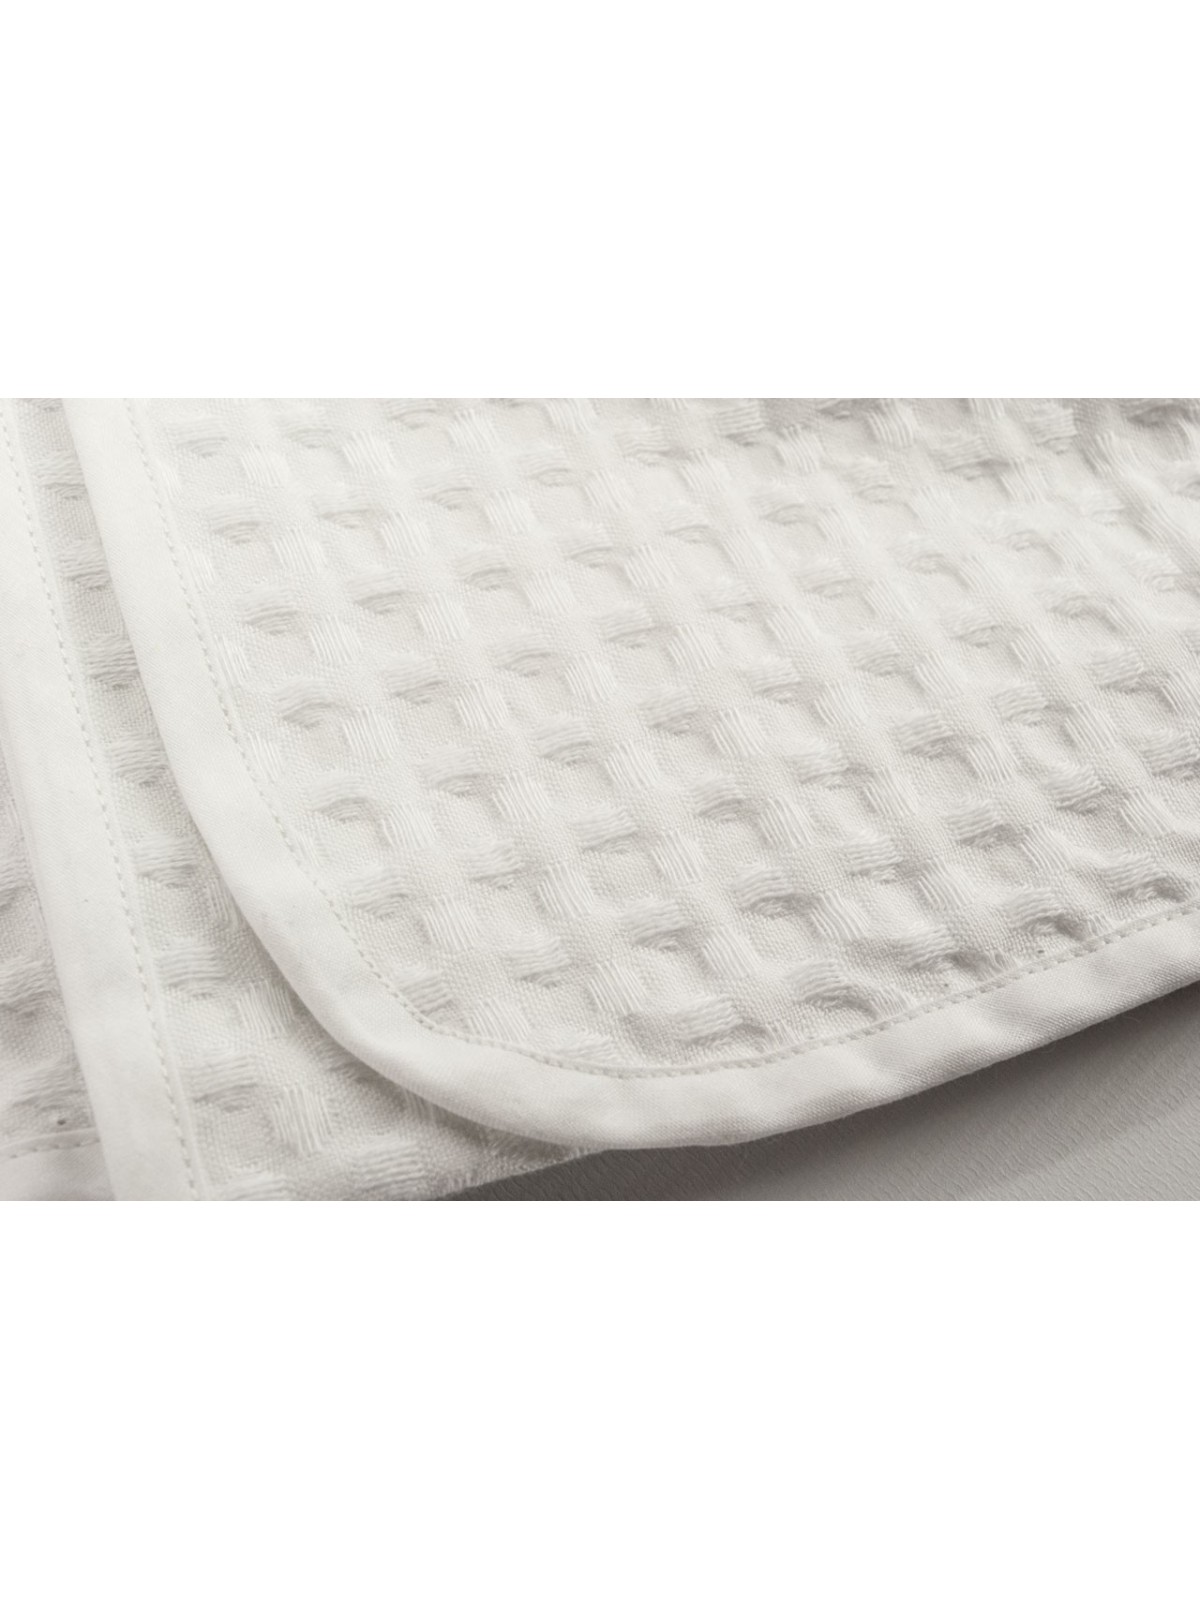 Honeycomb Face Towels + Bidet White Solid Color - Large cell